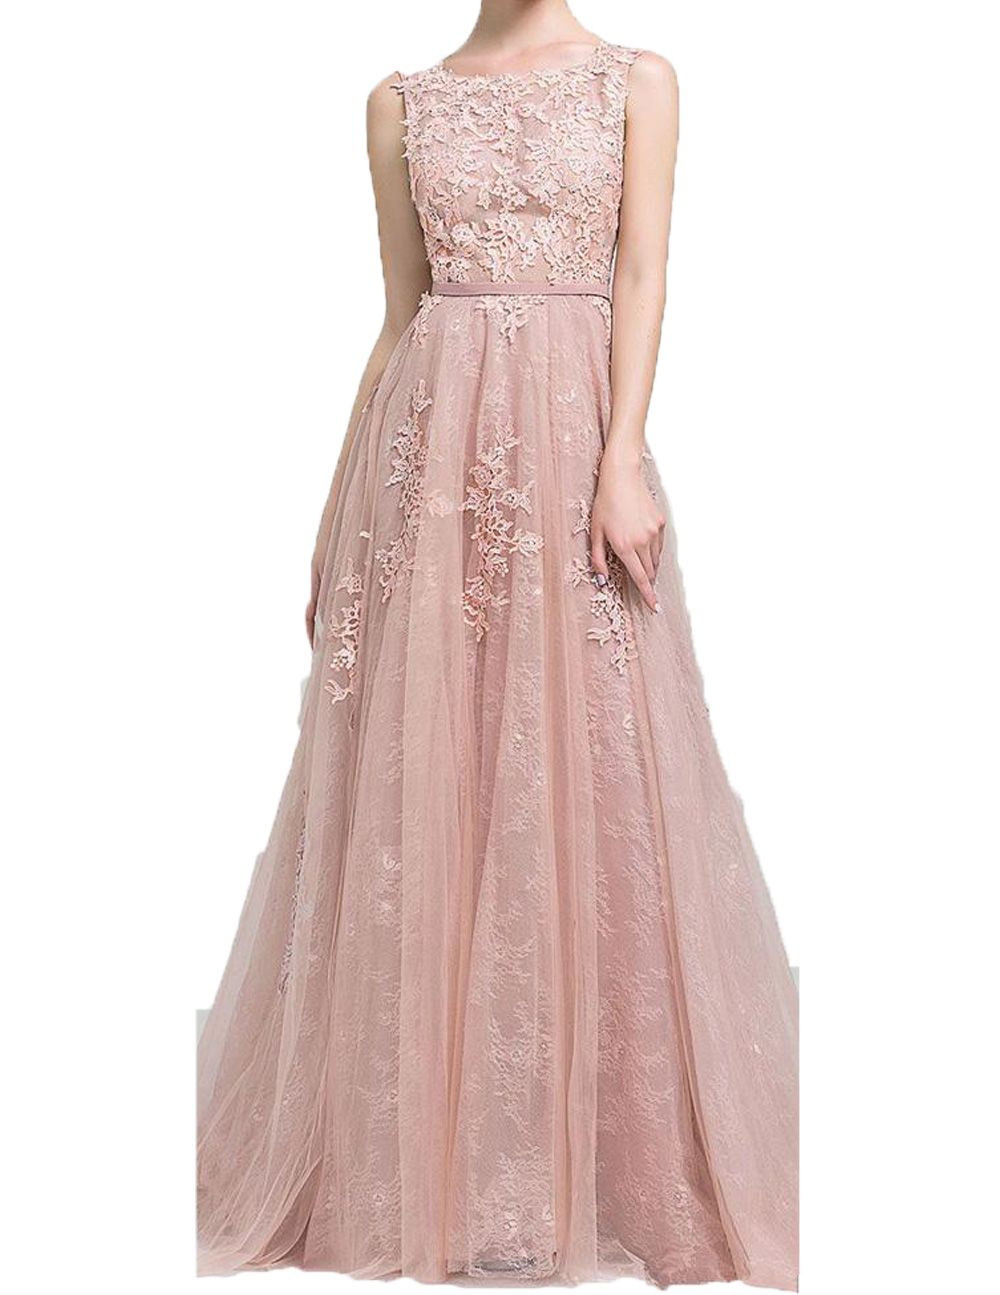 2019 Long Prom Dresses A Line Appliques Lace Sleeveless With Belt Blush ...